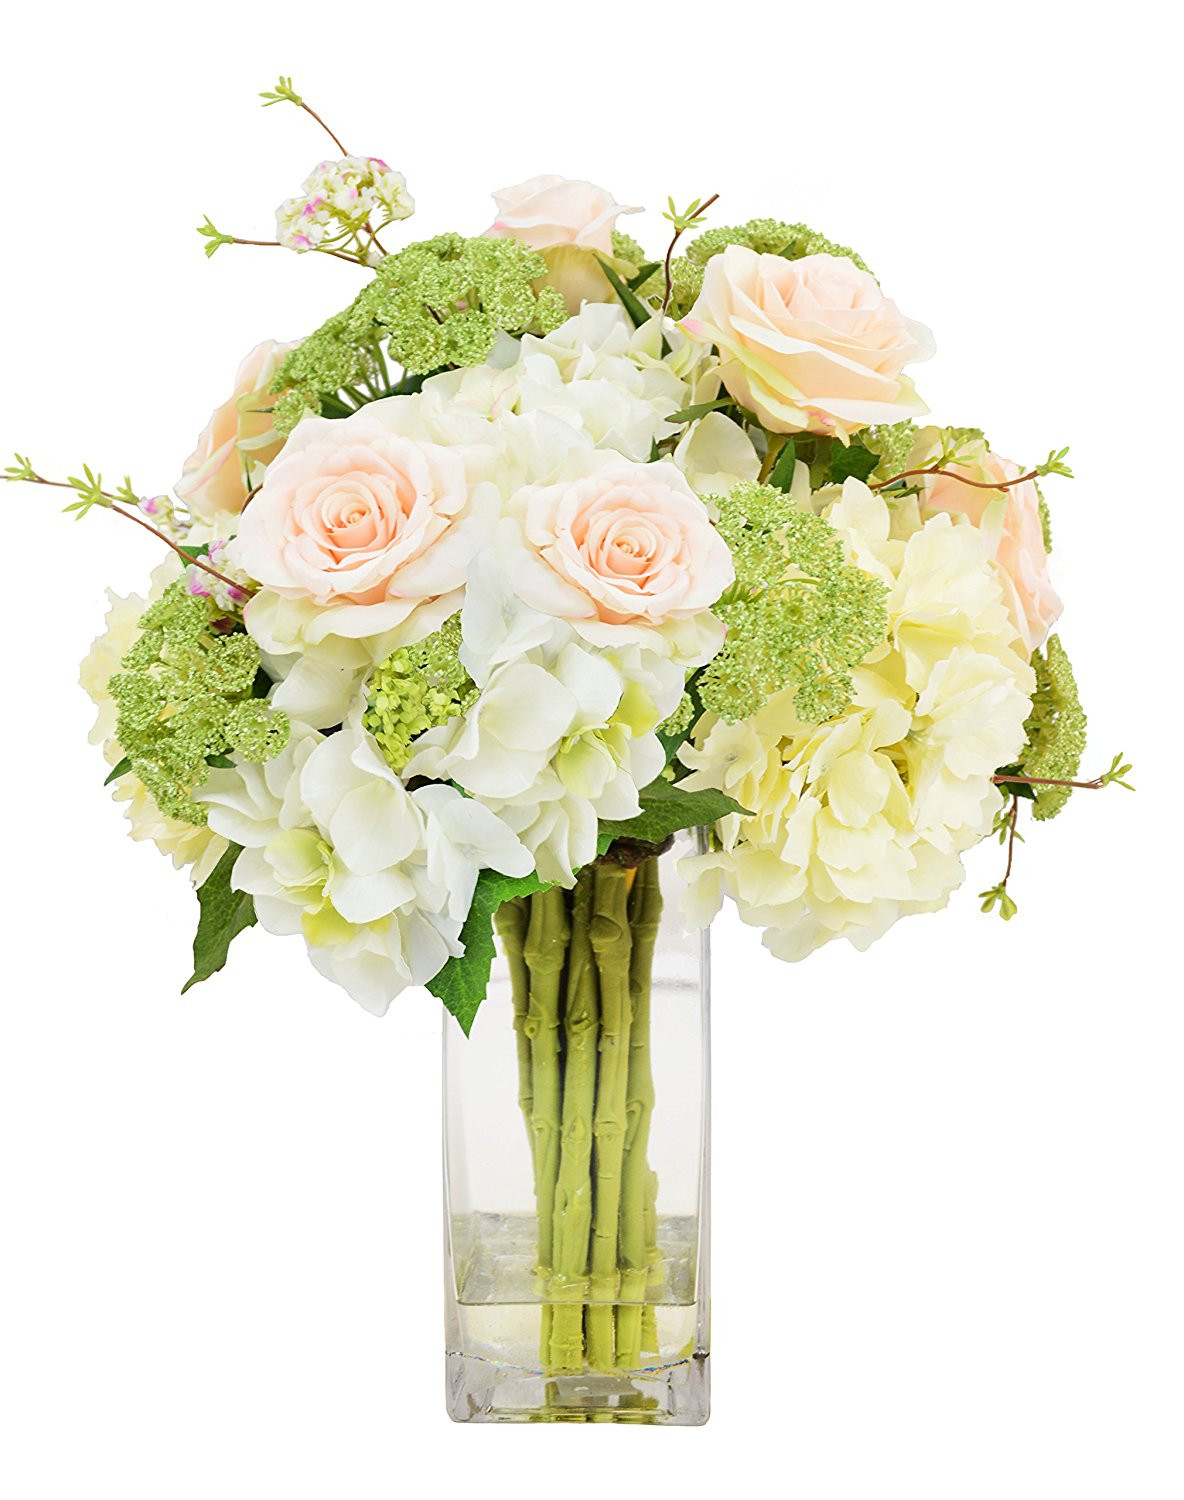 17 Unique 24 Inch Plastic Cylinder Vase 2024 free download 24 inch plastic cylinder vase of cheap tall square water glass cups find tall square water glass regarding get quotations ac2b7 creative displays cream hydrangeas green queen anns lace soft 